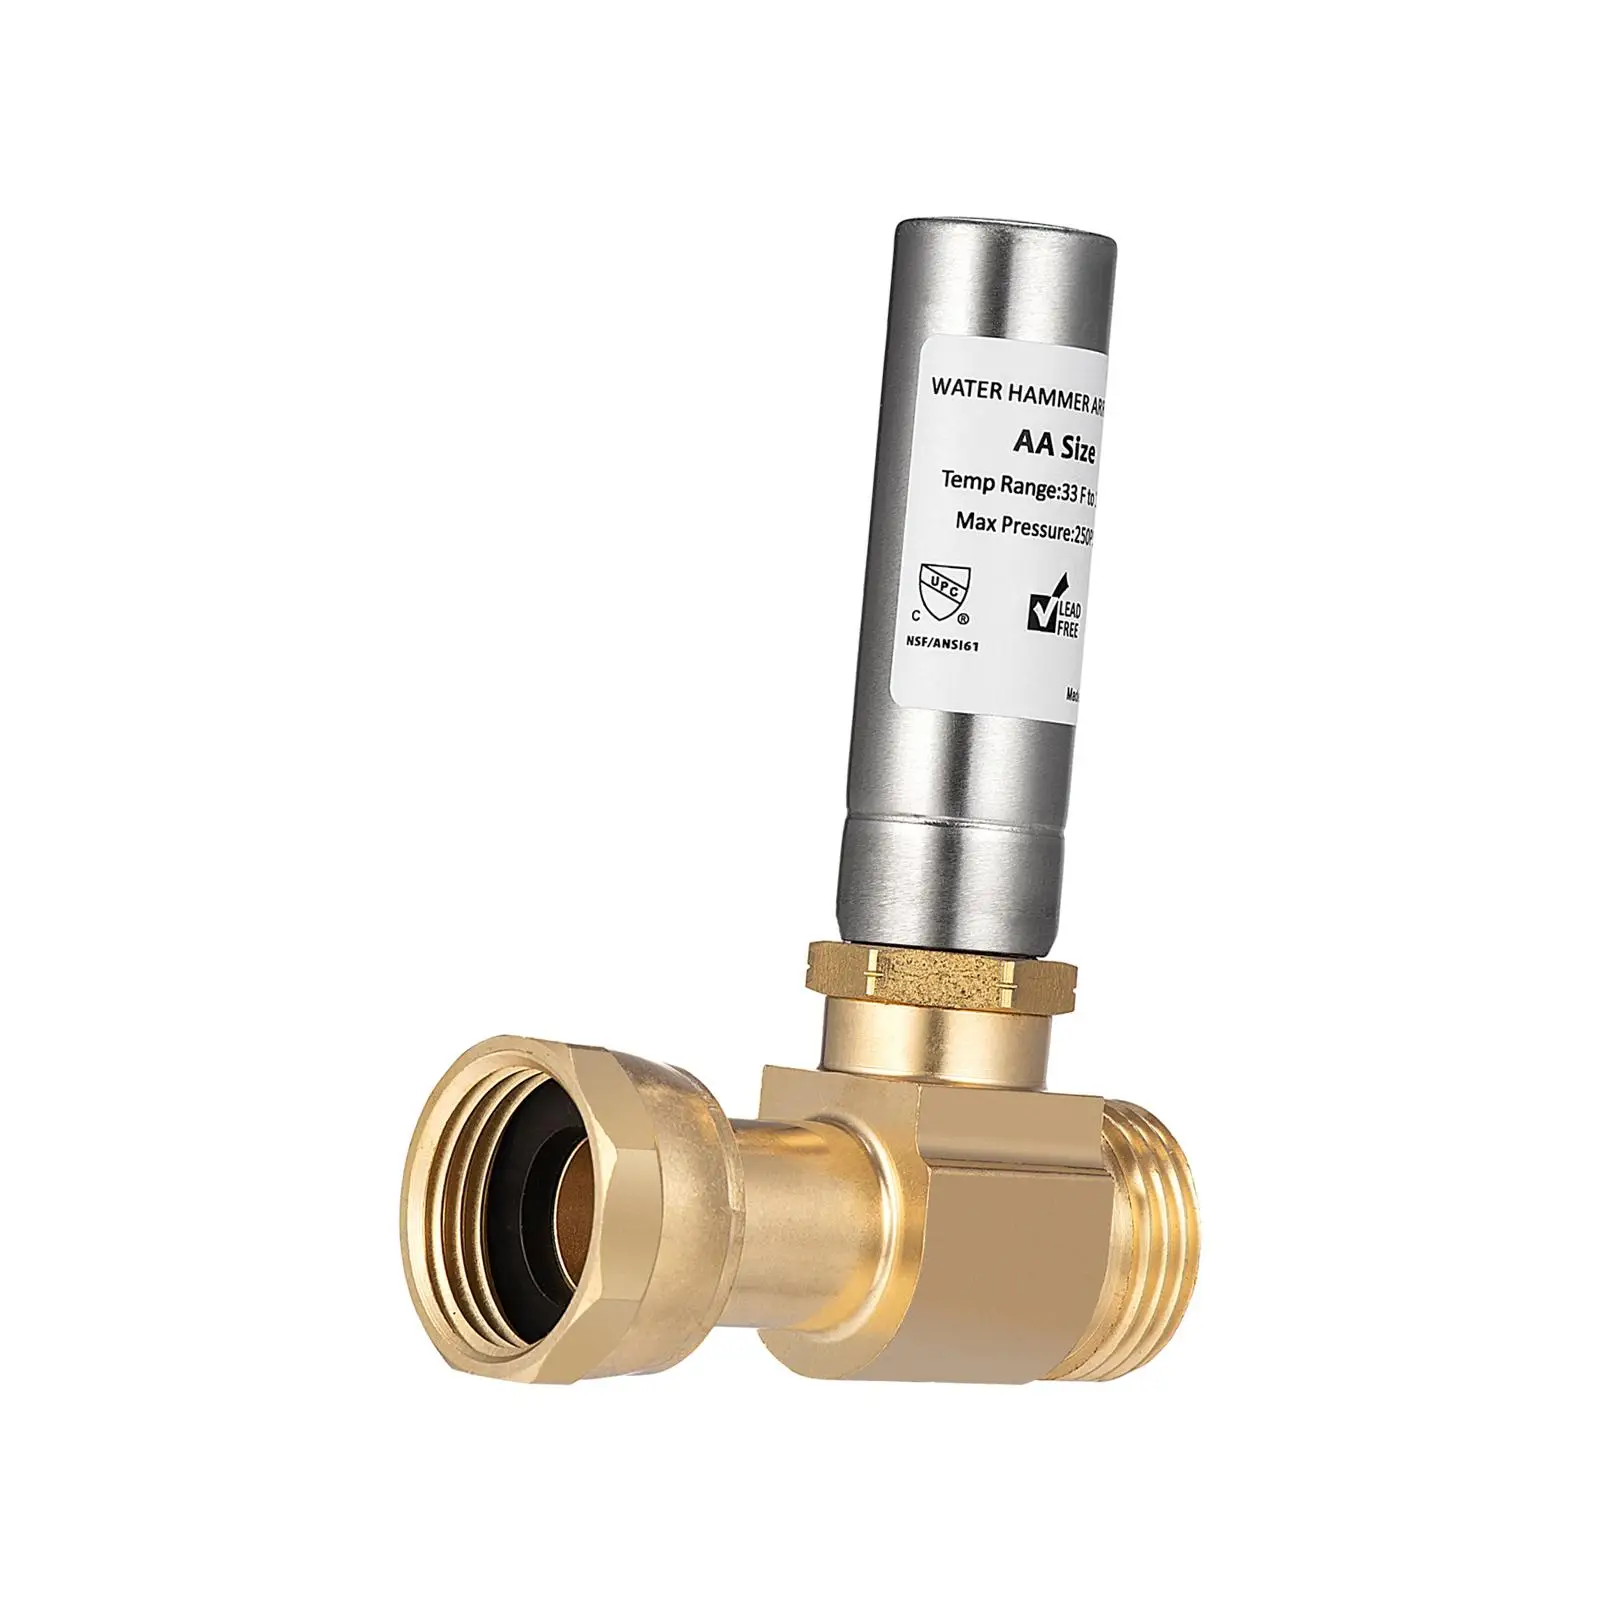 Water Hammer Arrestor, Pressure Reducer High Temperature Brass Professional Washing Machine Angle for Washer, Room